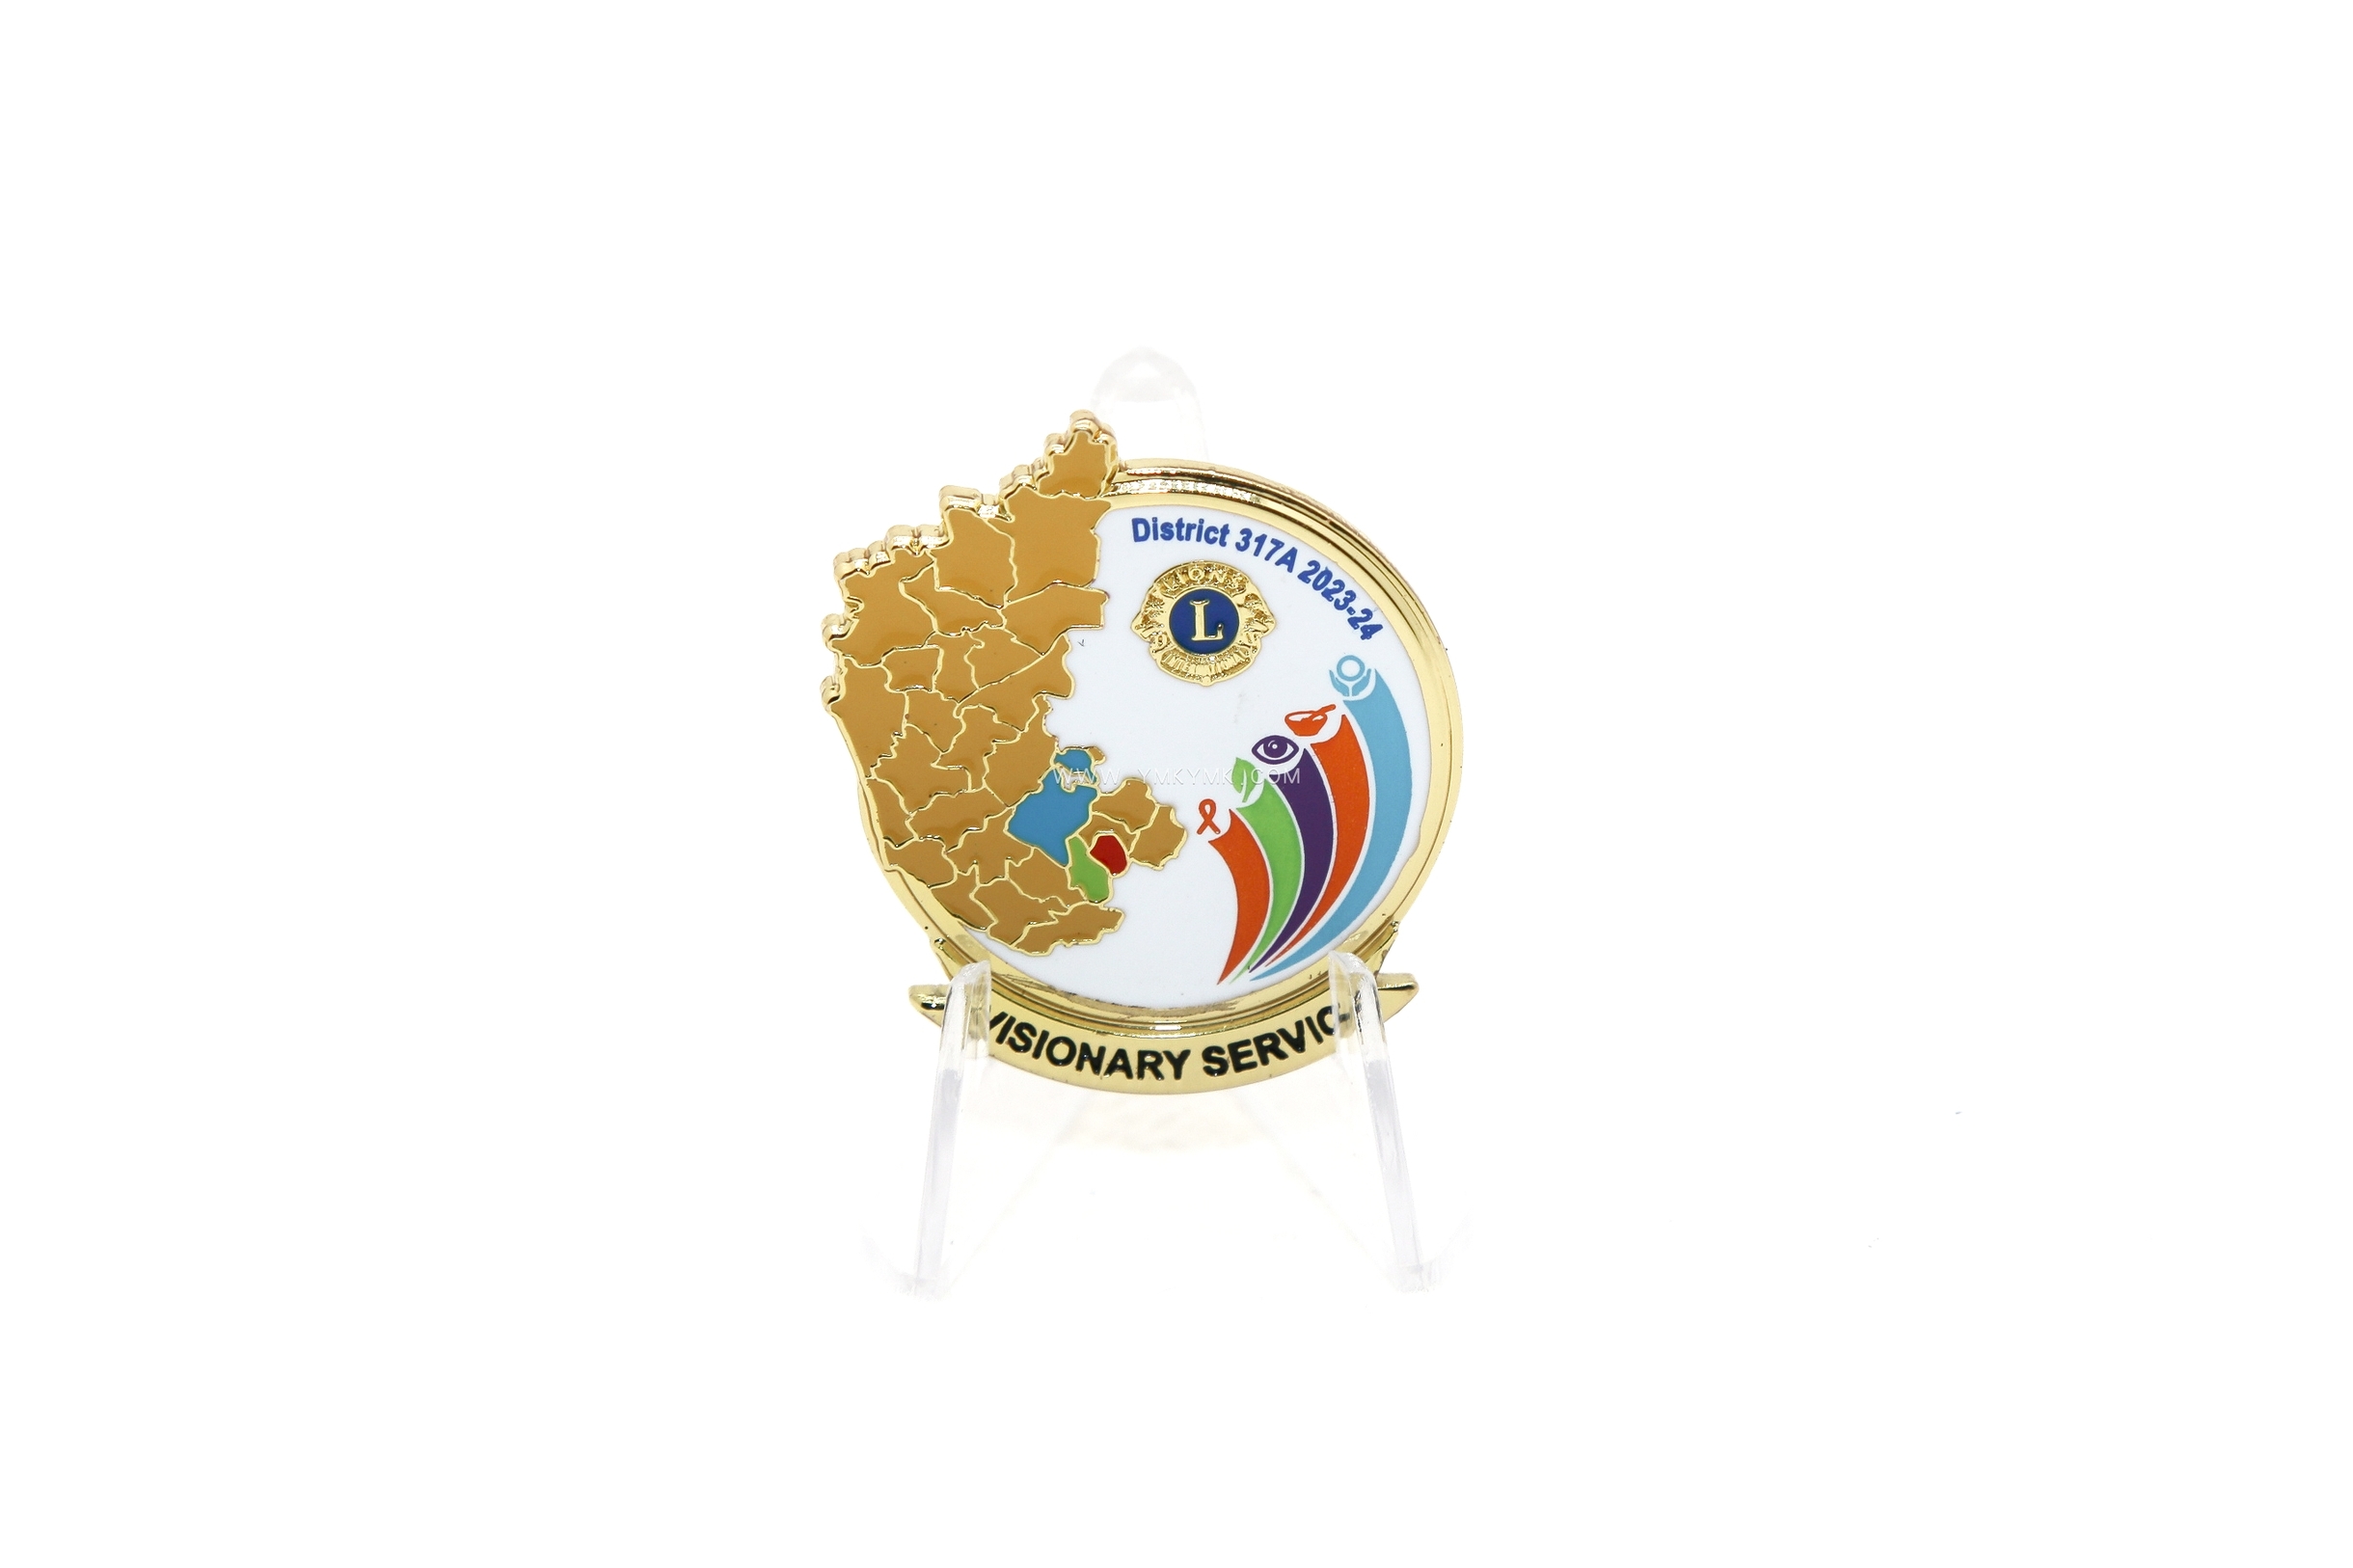 VISIONARY SERVIVE District 317A 2023-2024-LAPEl Pin-IMKGIFT 图1张